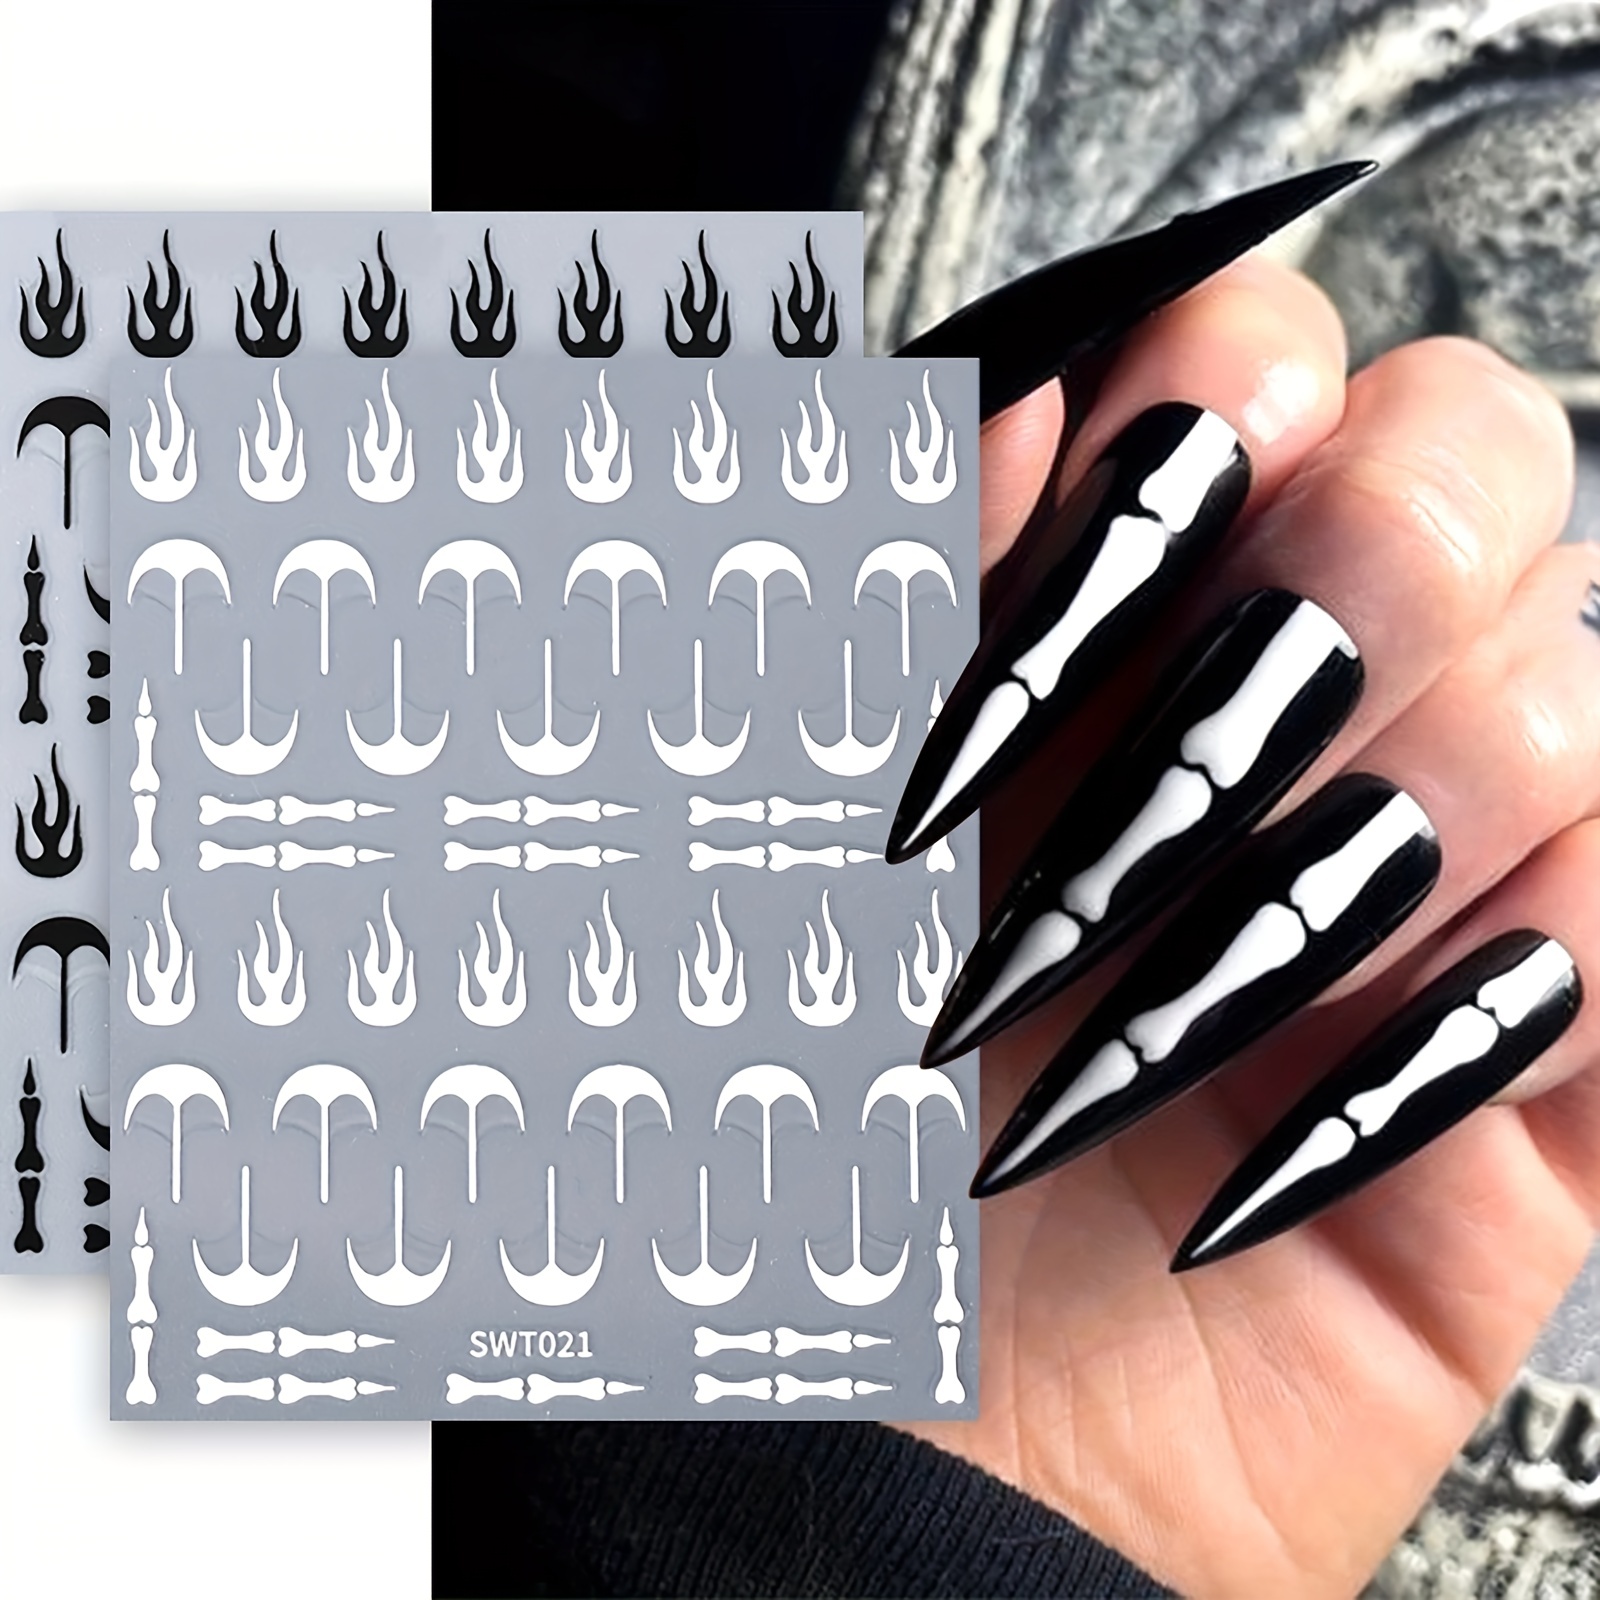 7pcs Gothic Nail Stickers Decals, Mixed Color White Black Silver Alphabet  Old English Character Nail Sliders DIY Art Manicure Decoration Set